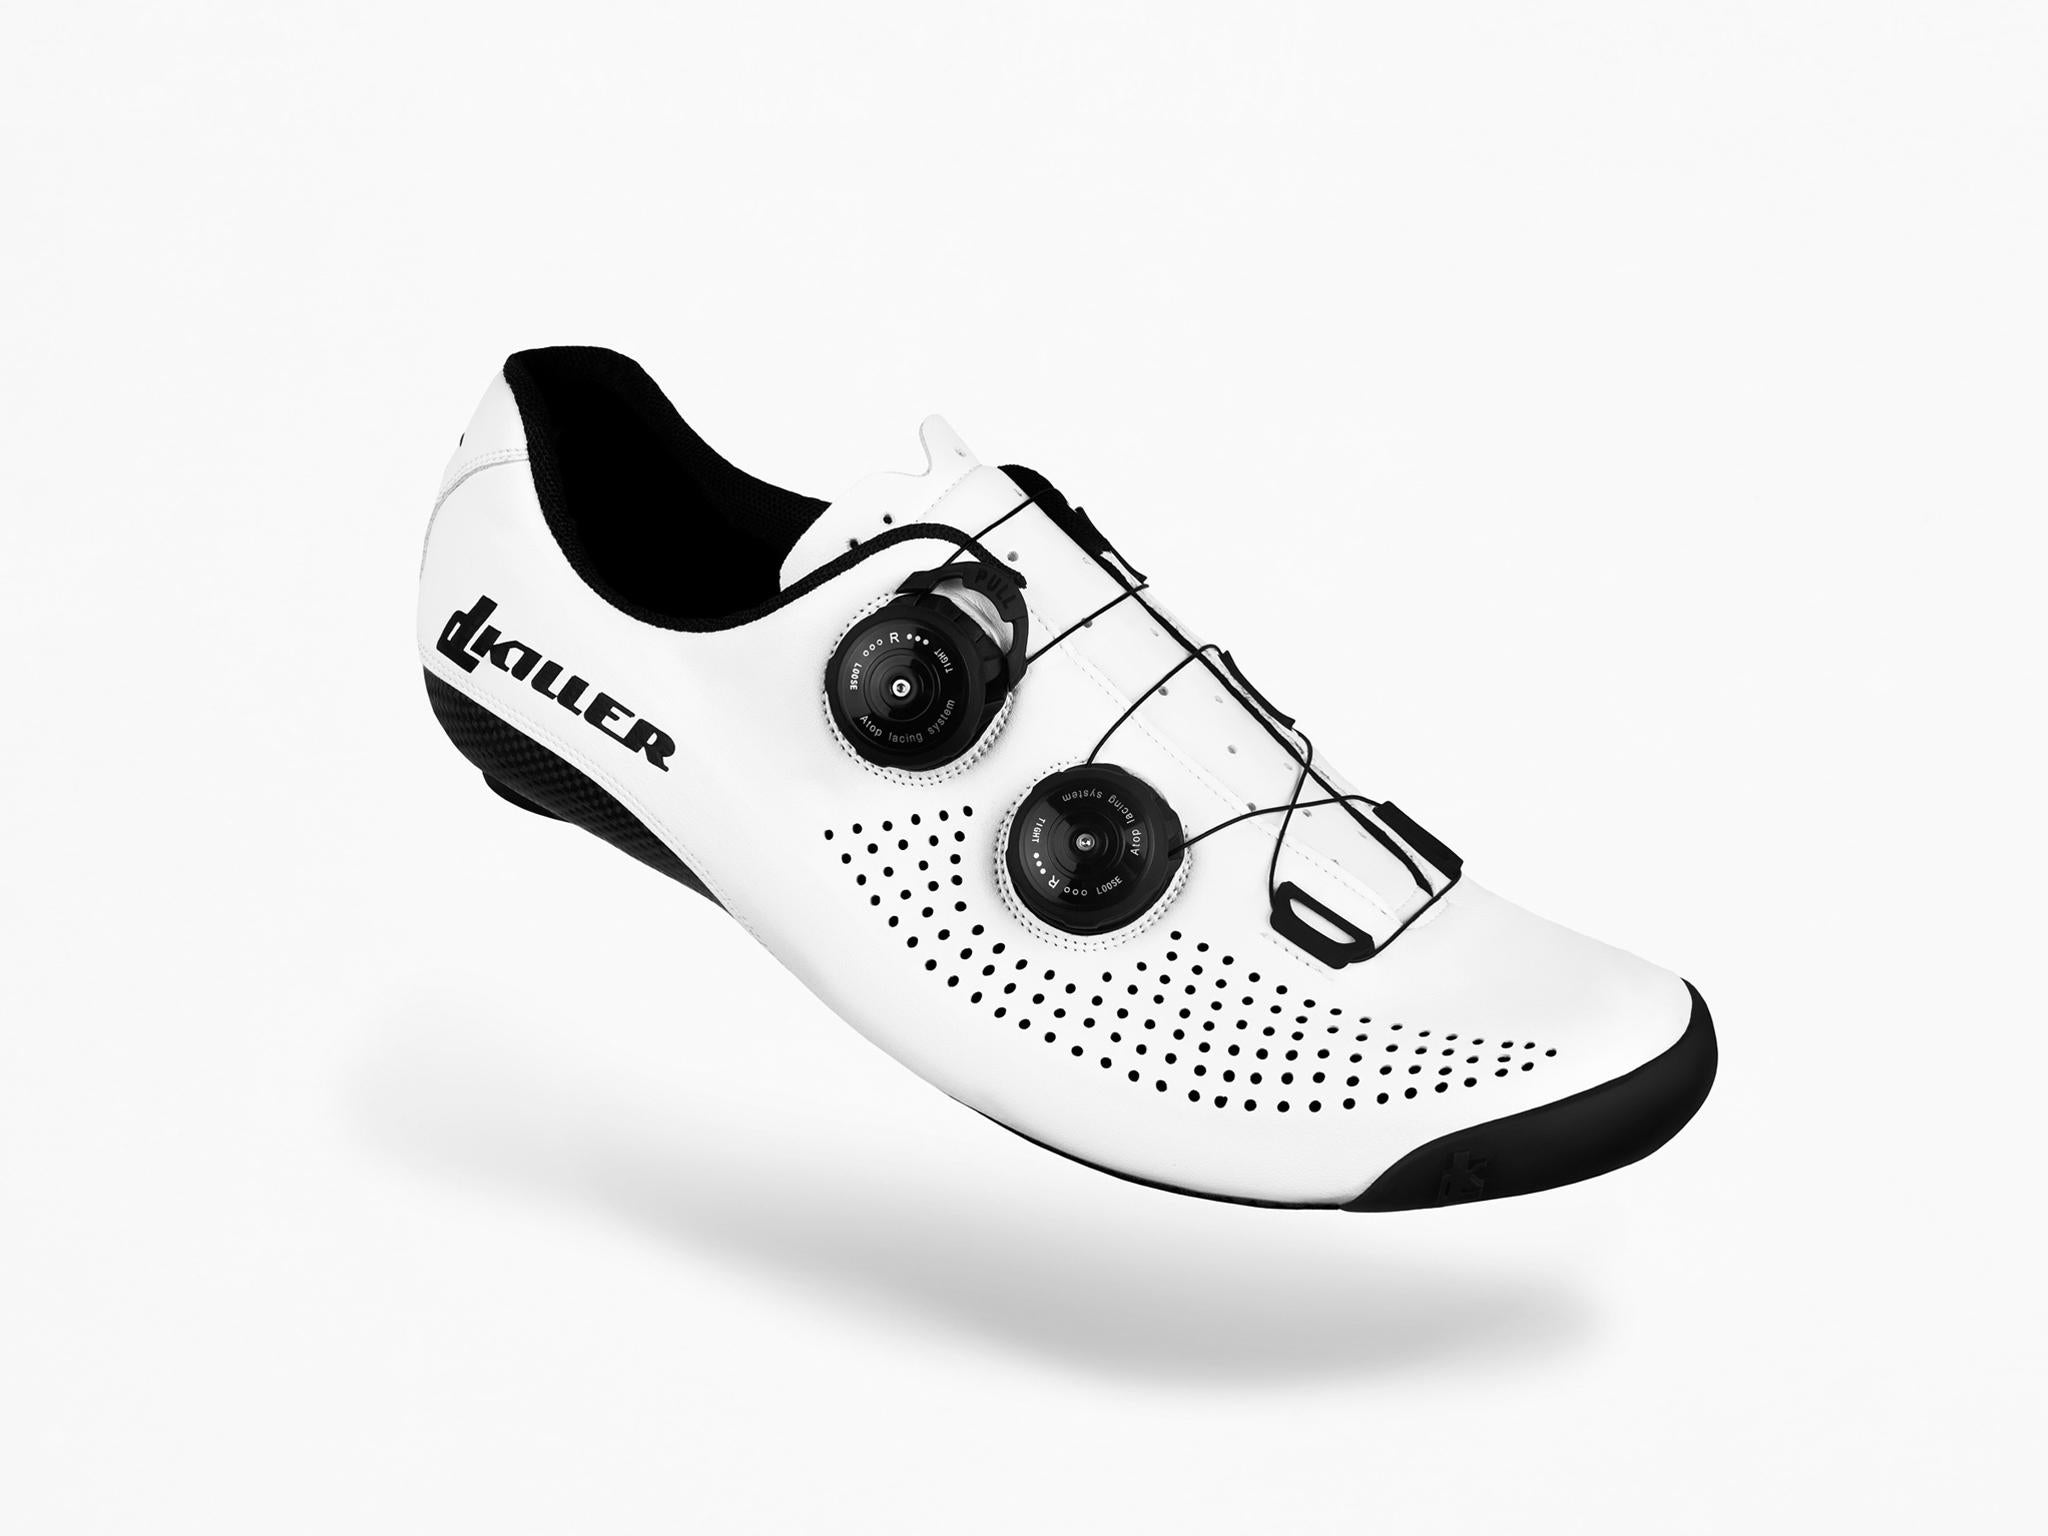 coolest cycling shoes